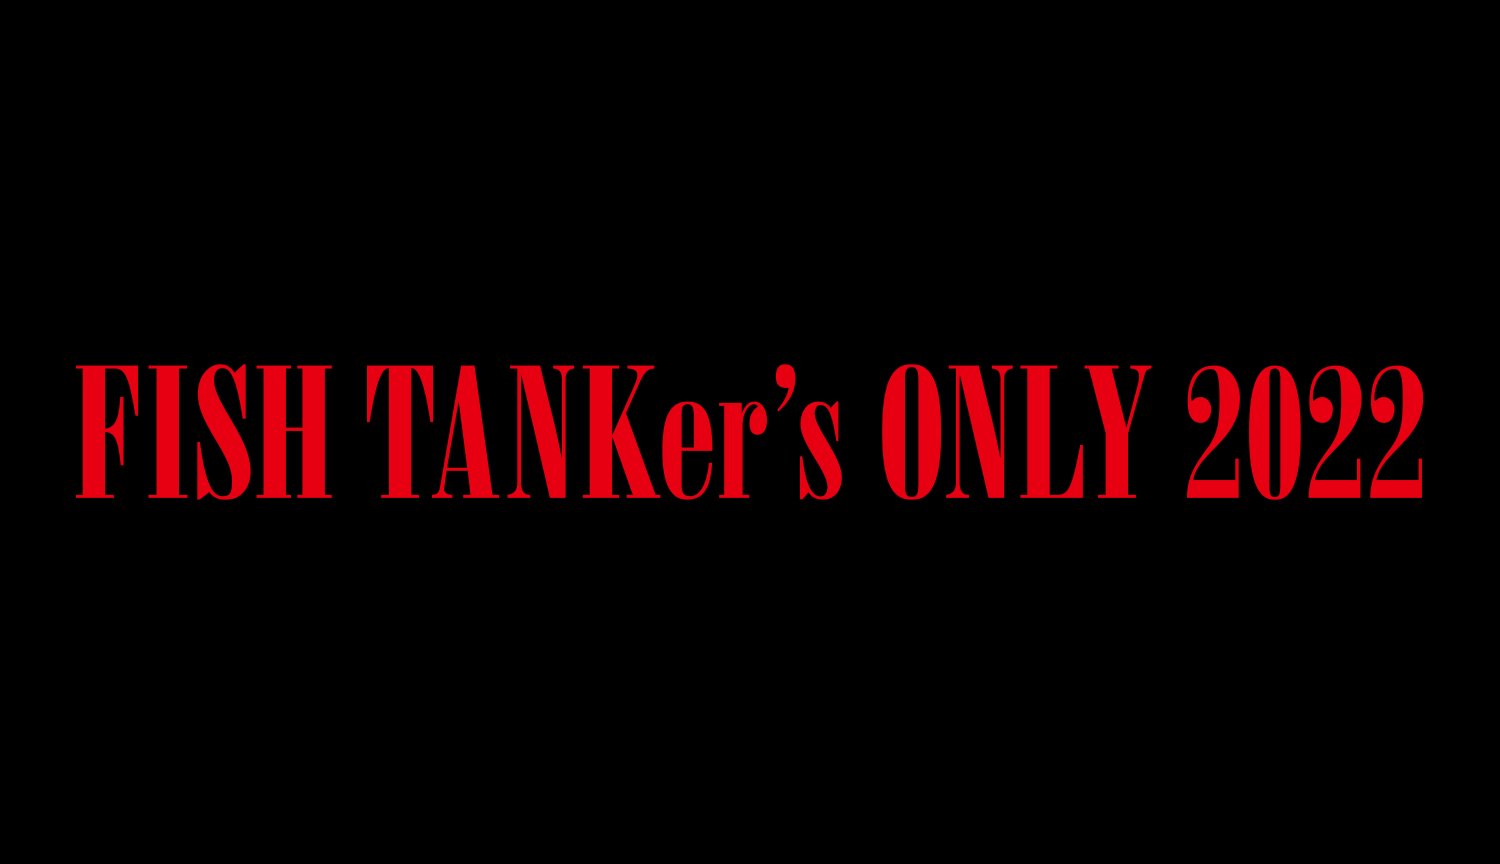 「FISH TANKer's ONLY 2022」